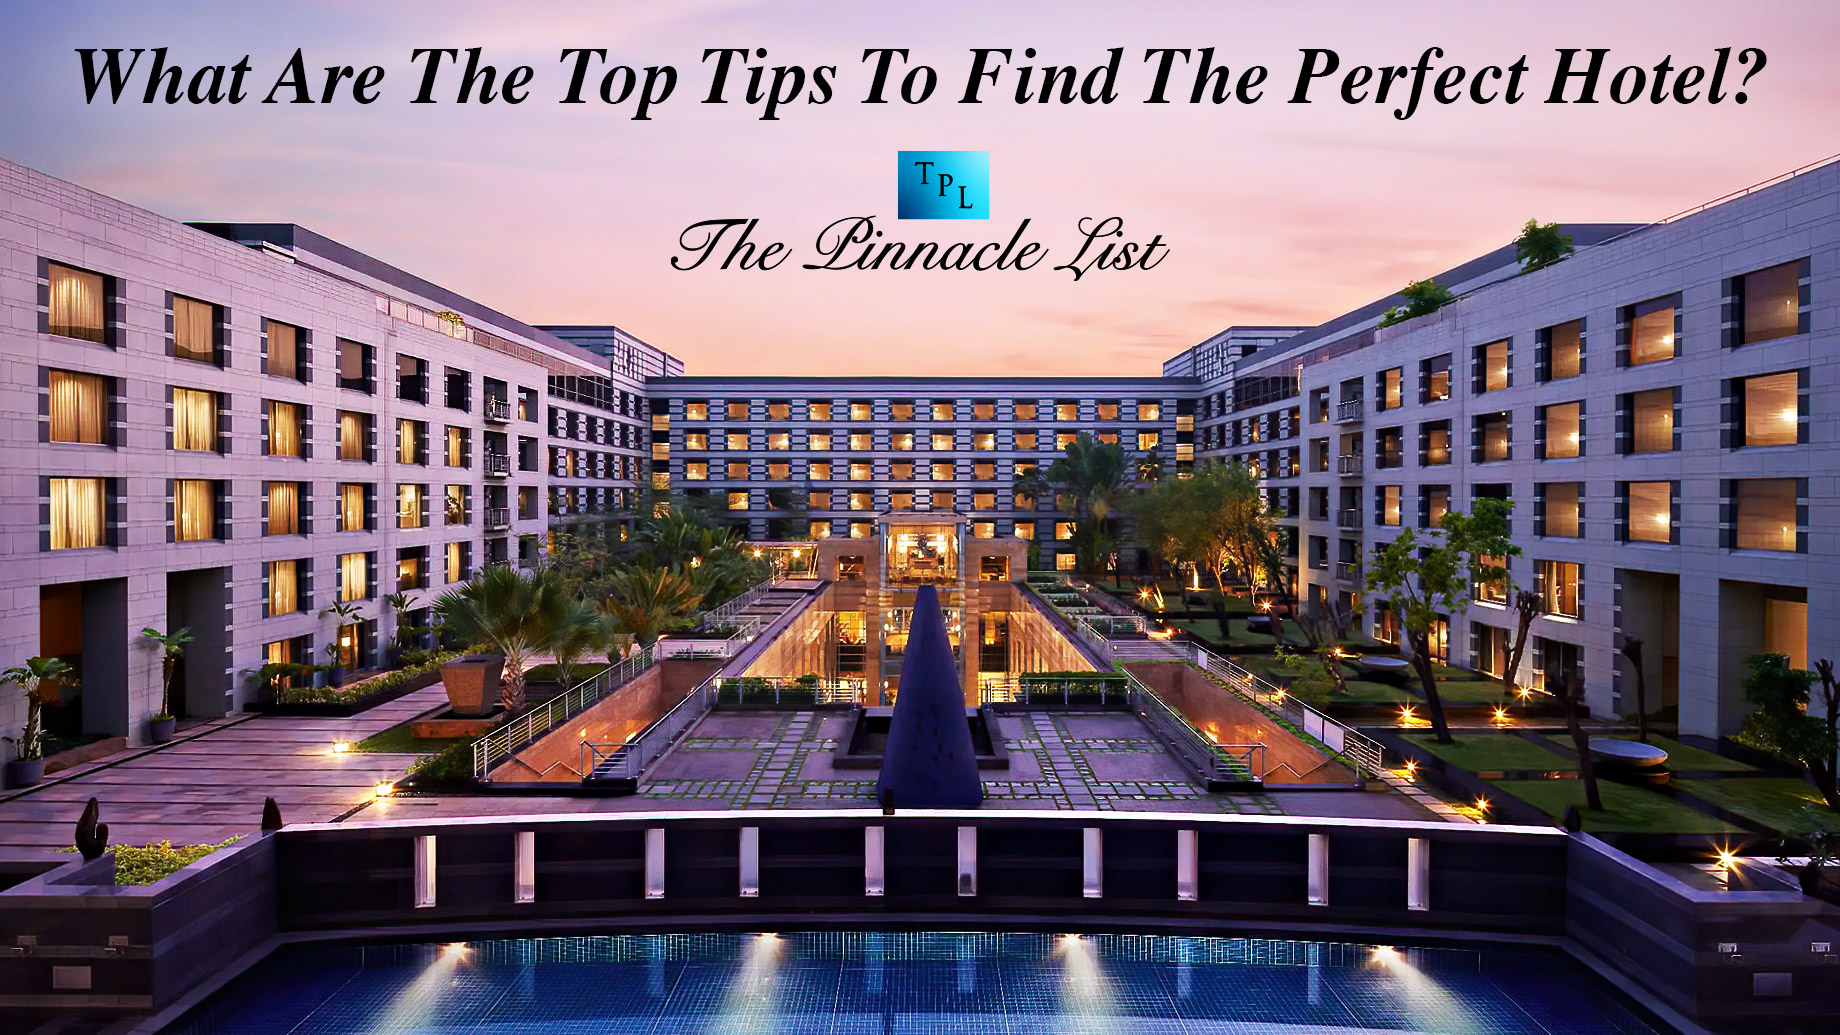 What Are The Top Tips To Find The Perfect Hotel?